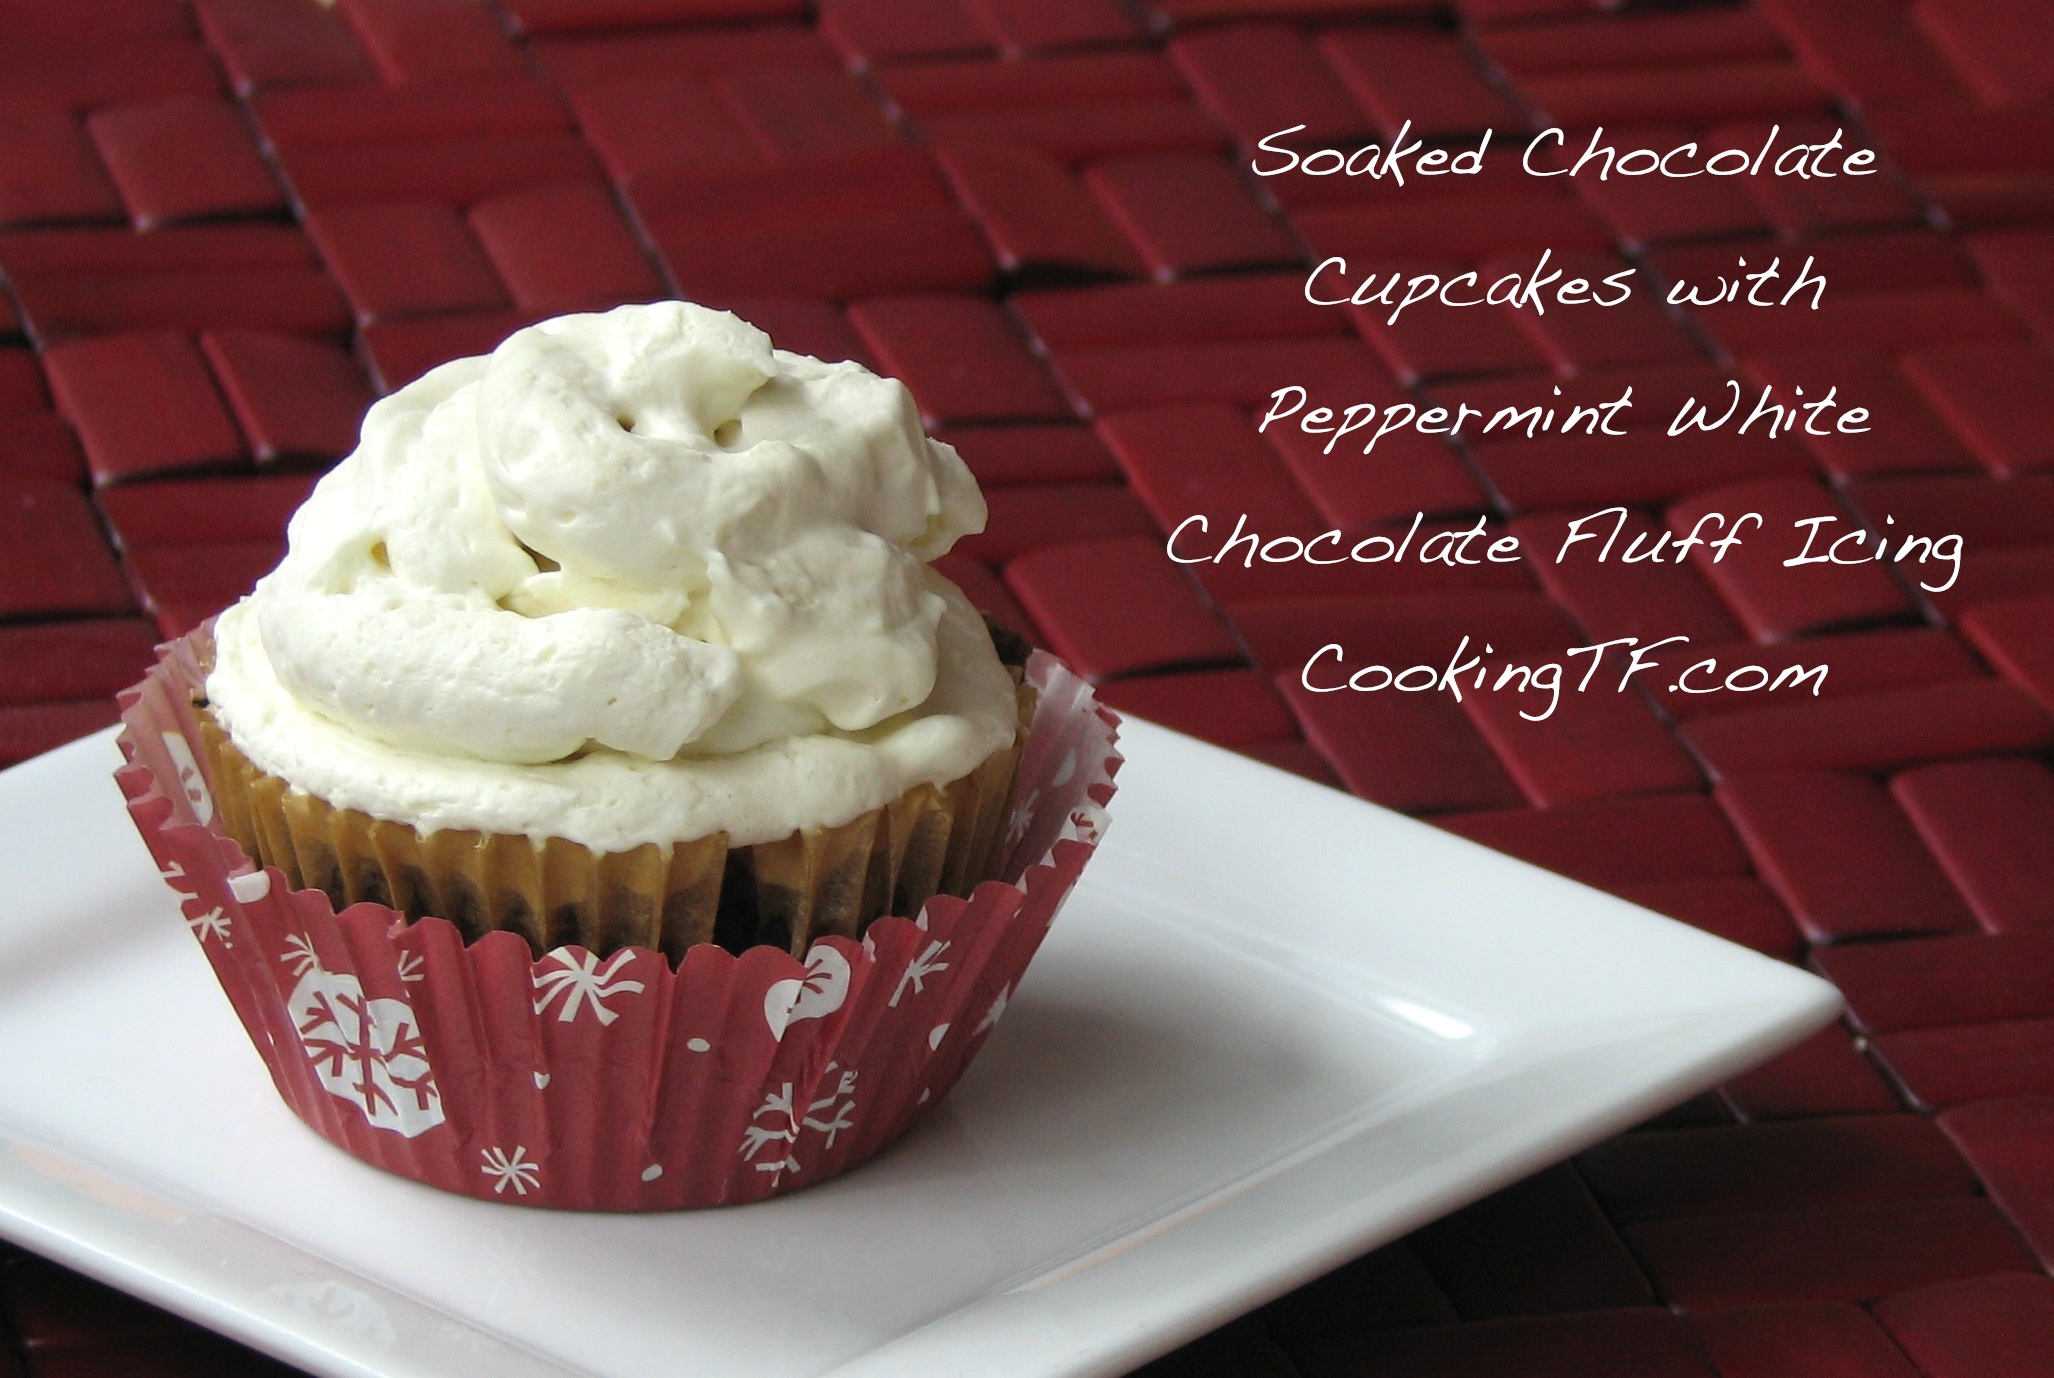 Soaked Chocolate Cupcakes- Gluten-Free, Dairy-Free, Egg-Free